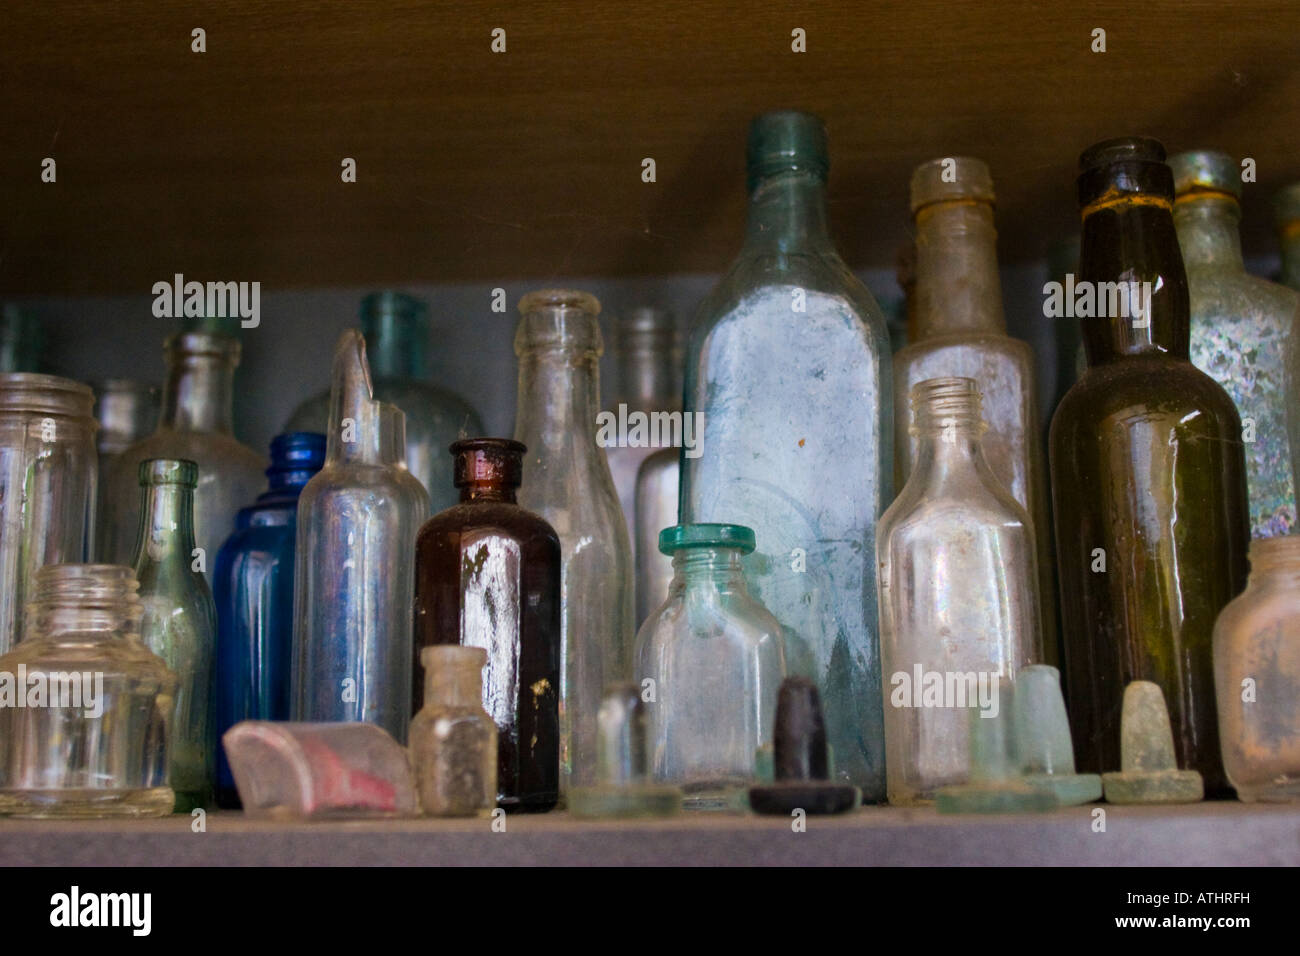 Vintage glass bottles and stoppers on shelf Stock Photo